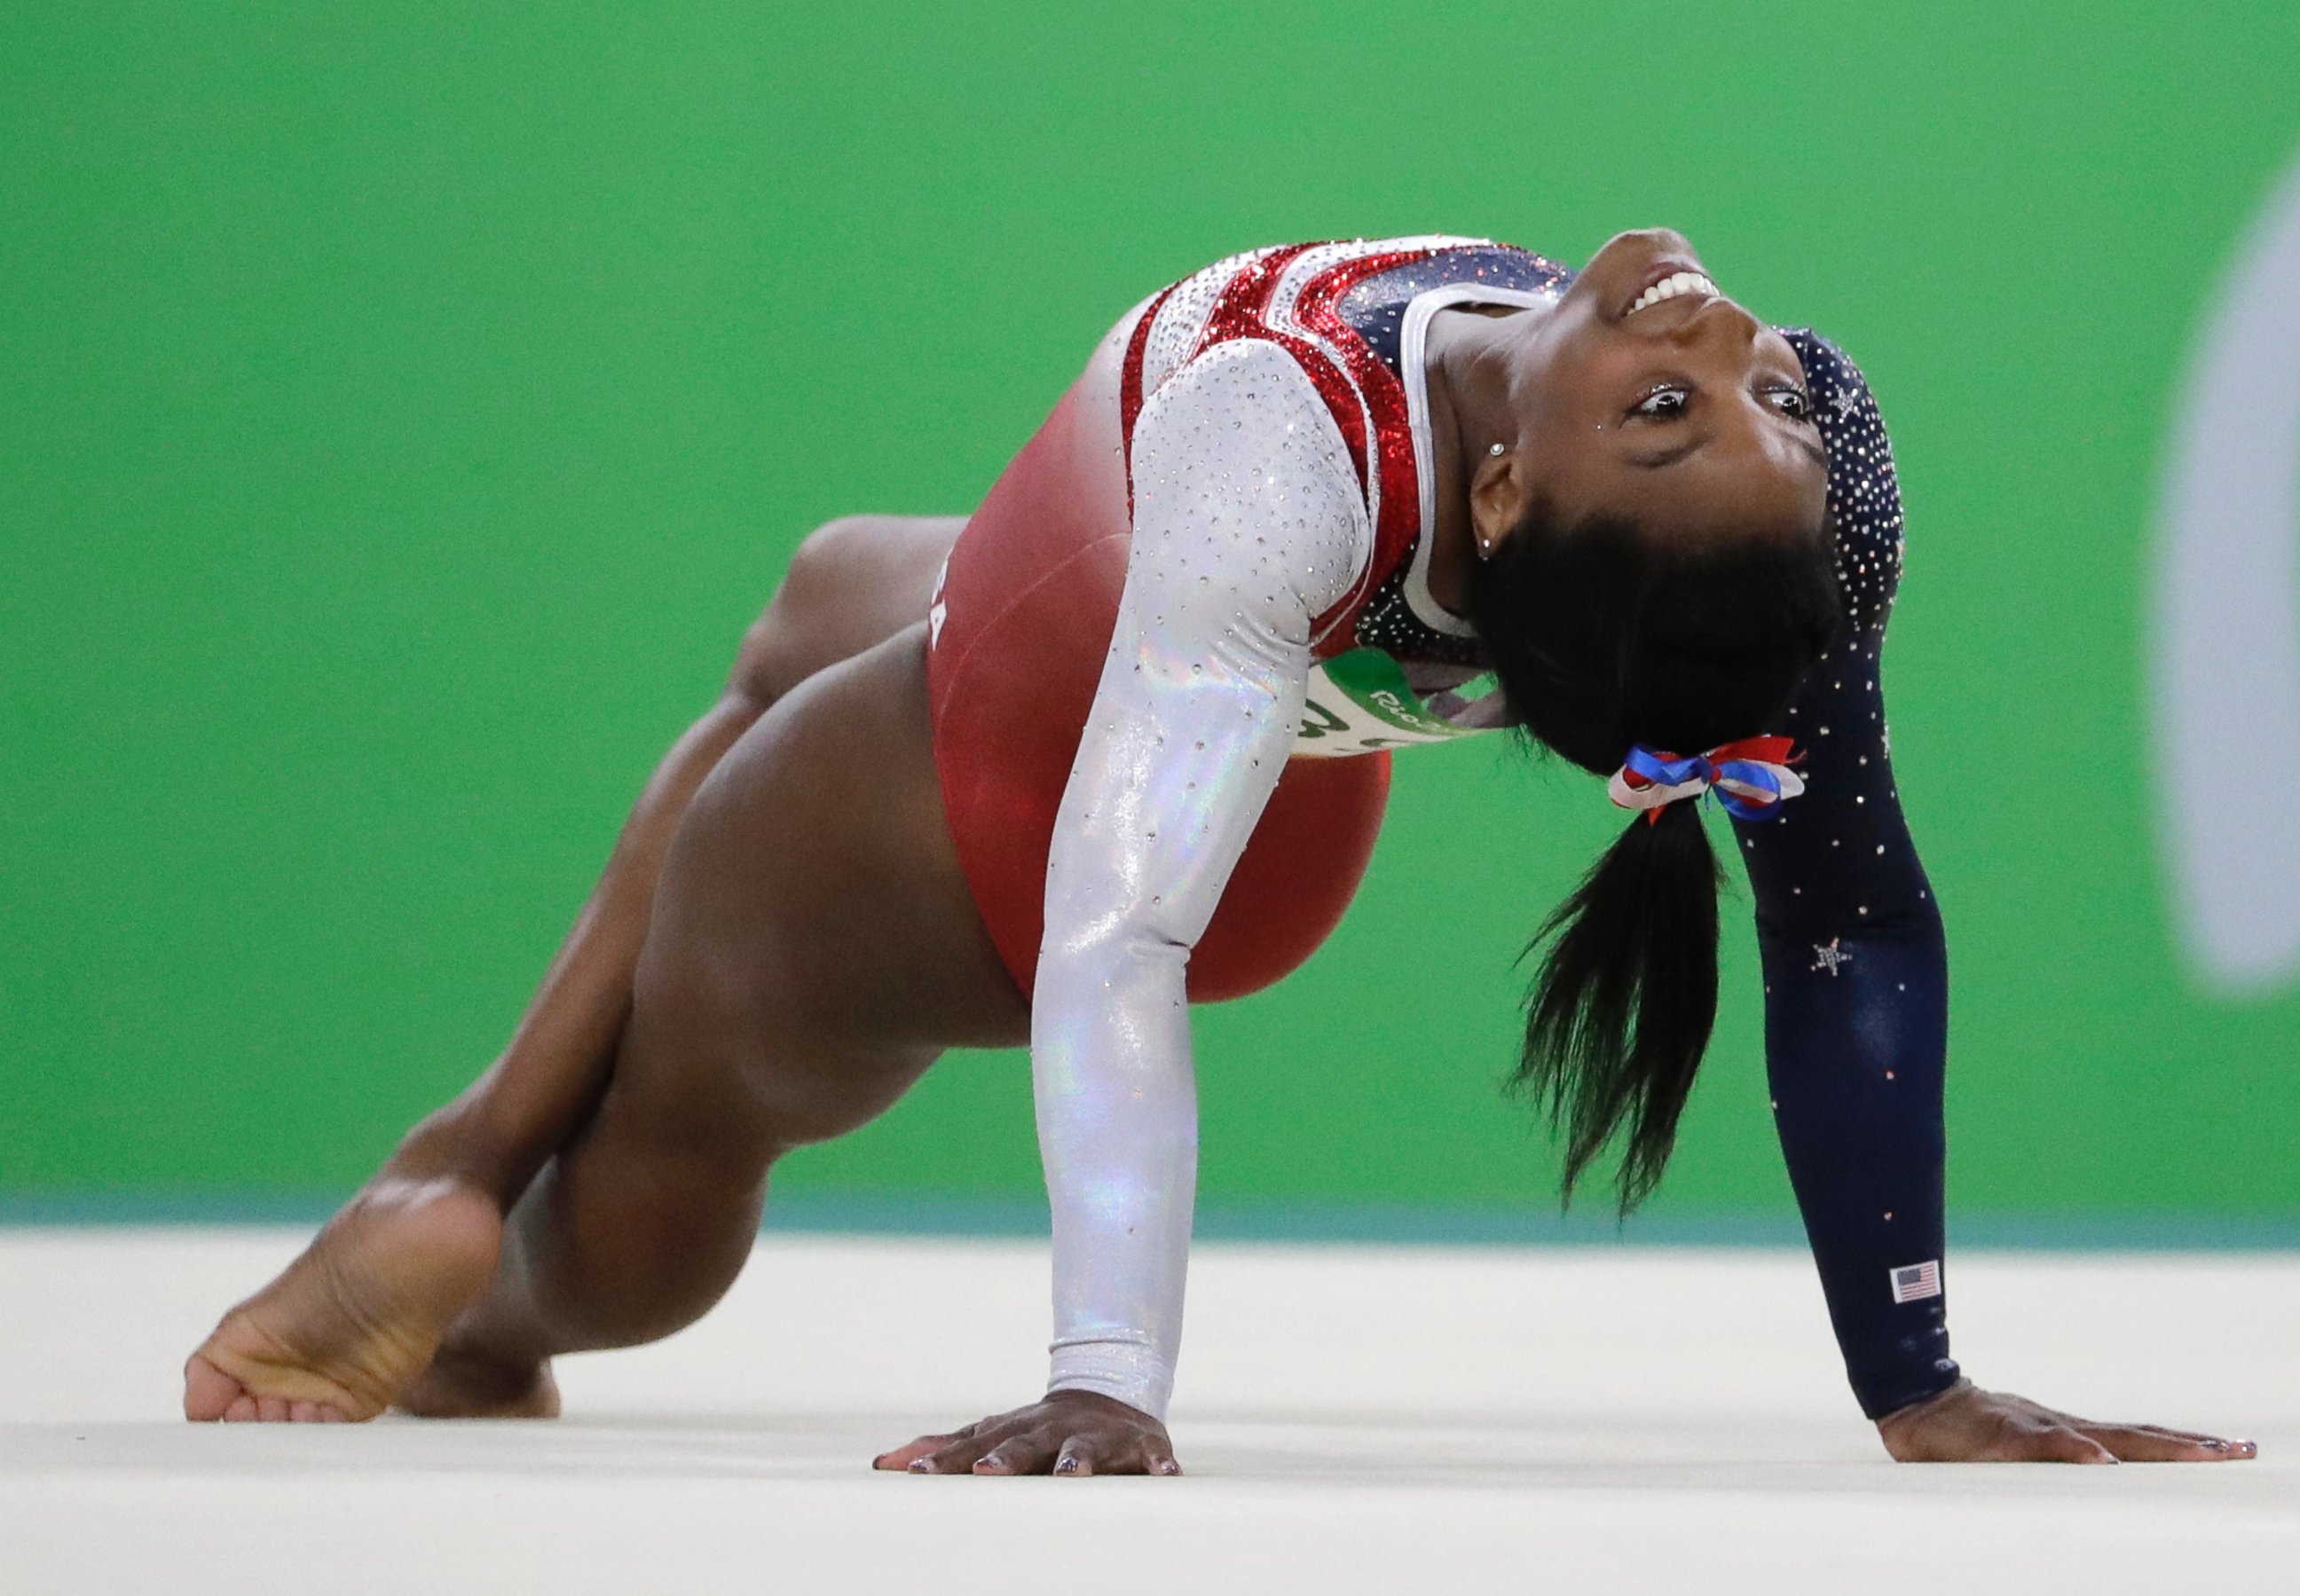 PHOTO: United States' Simone Biles performs on the floor during the artistic gymnastics women's team final at the 2016 Summer Olympics in Rio de Janeiro, Brazil, Aug. 9, 2016.